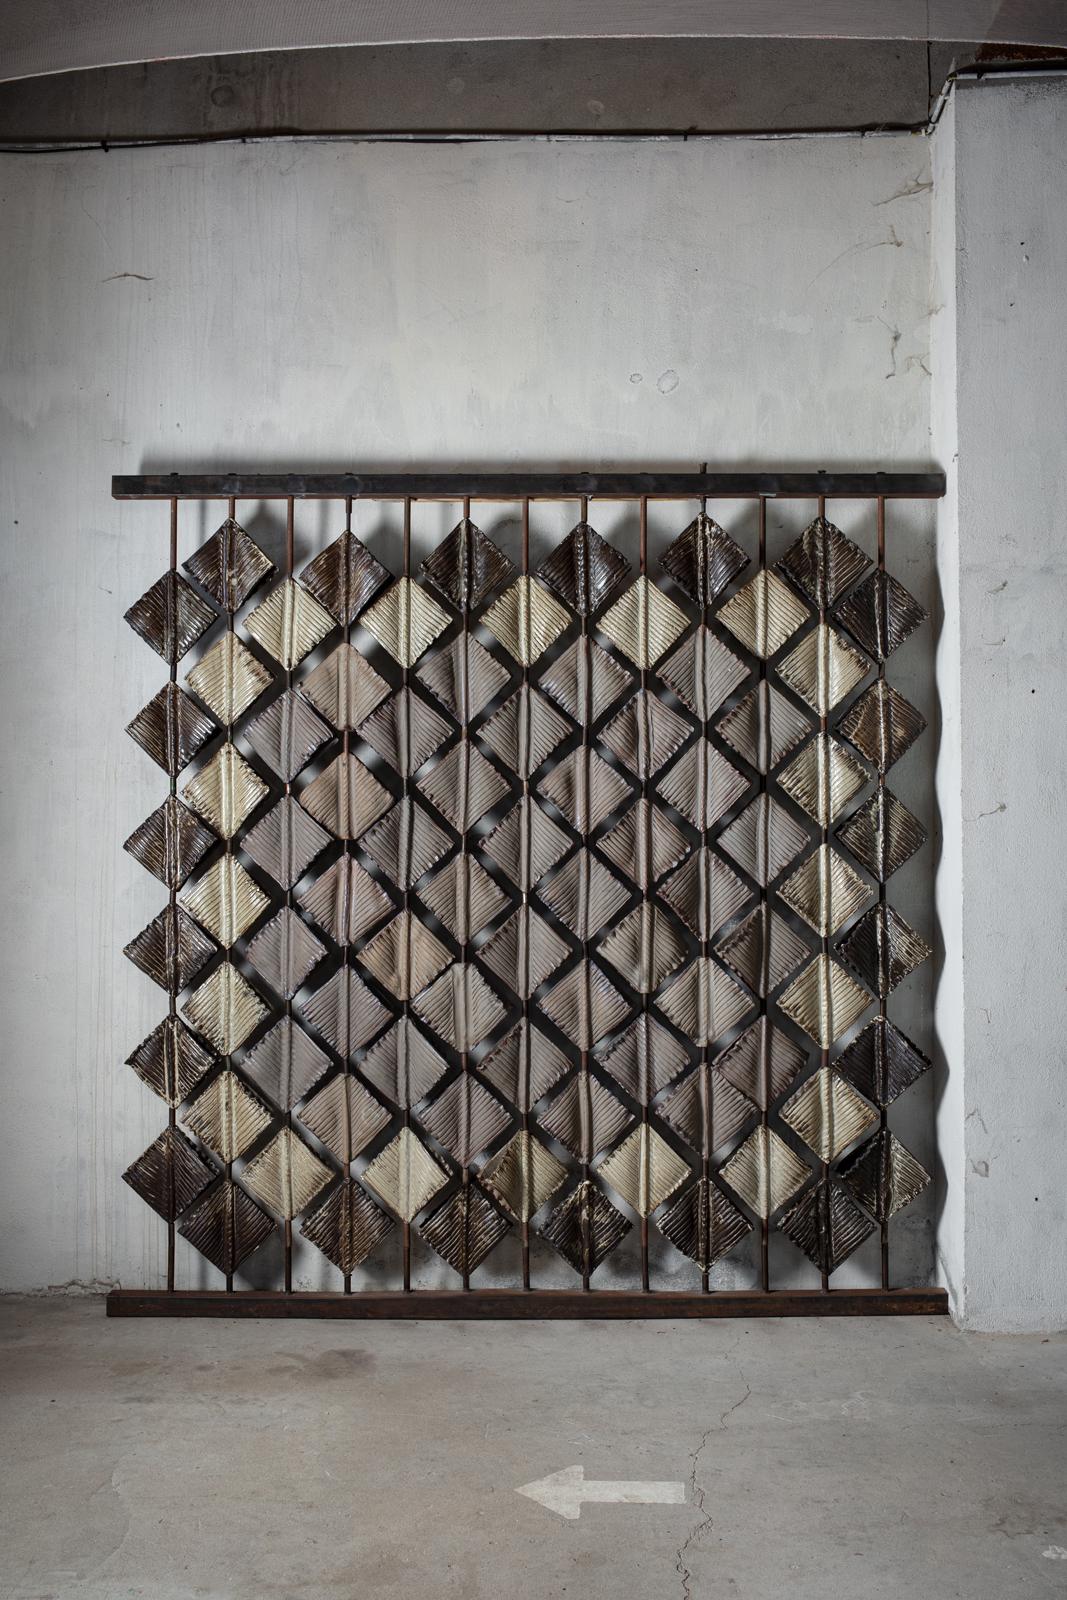 Large glazed stoneware screen composed of 84 modular elements by Anne Barrès. 
2010. 
Unique piece. 
Can be displayed both indoors and outdoors.
H : 95.5’ x 93.7’ inches (claustra).
H : 10.6’ x 10.2’ x 3.3’ inches (each item).
Approximate